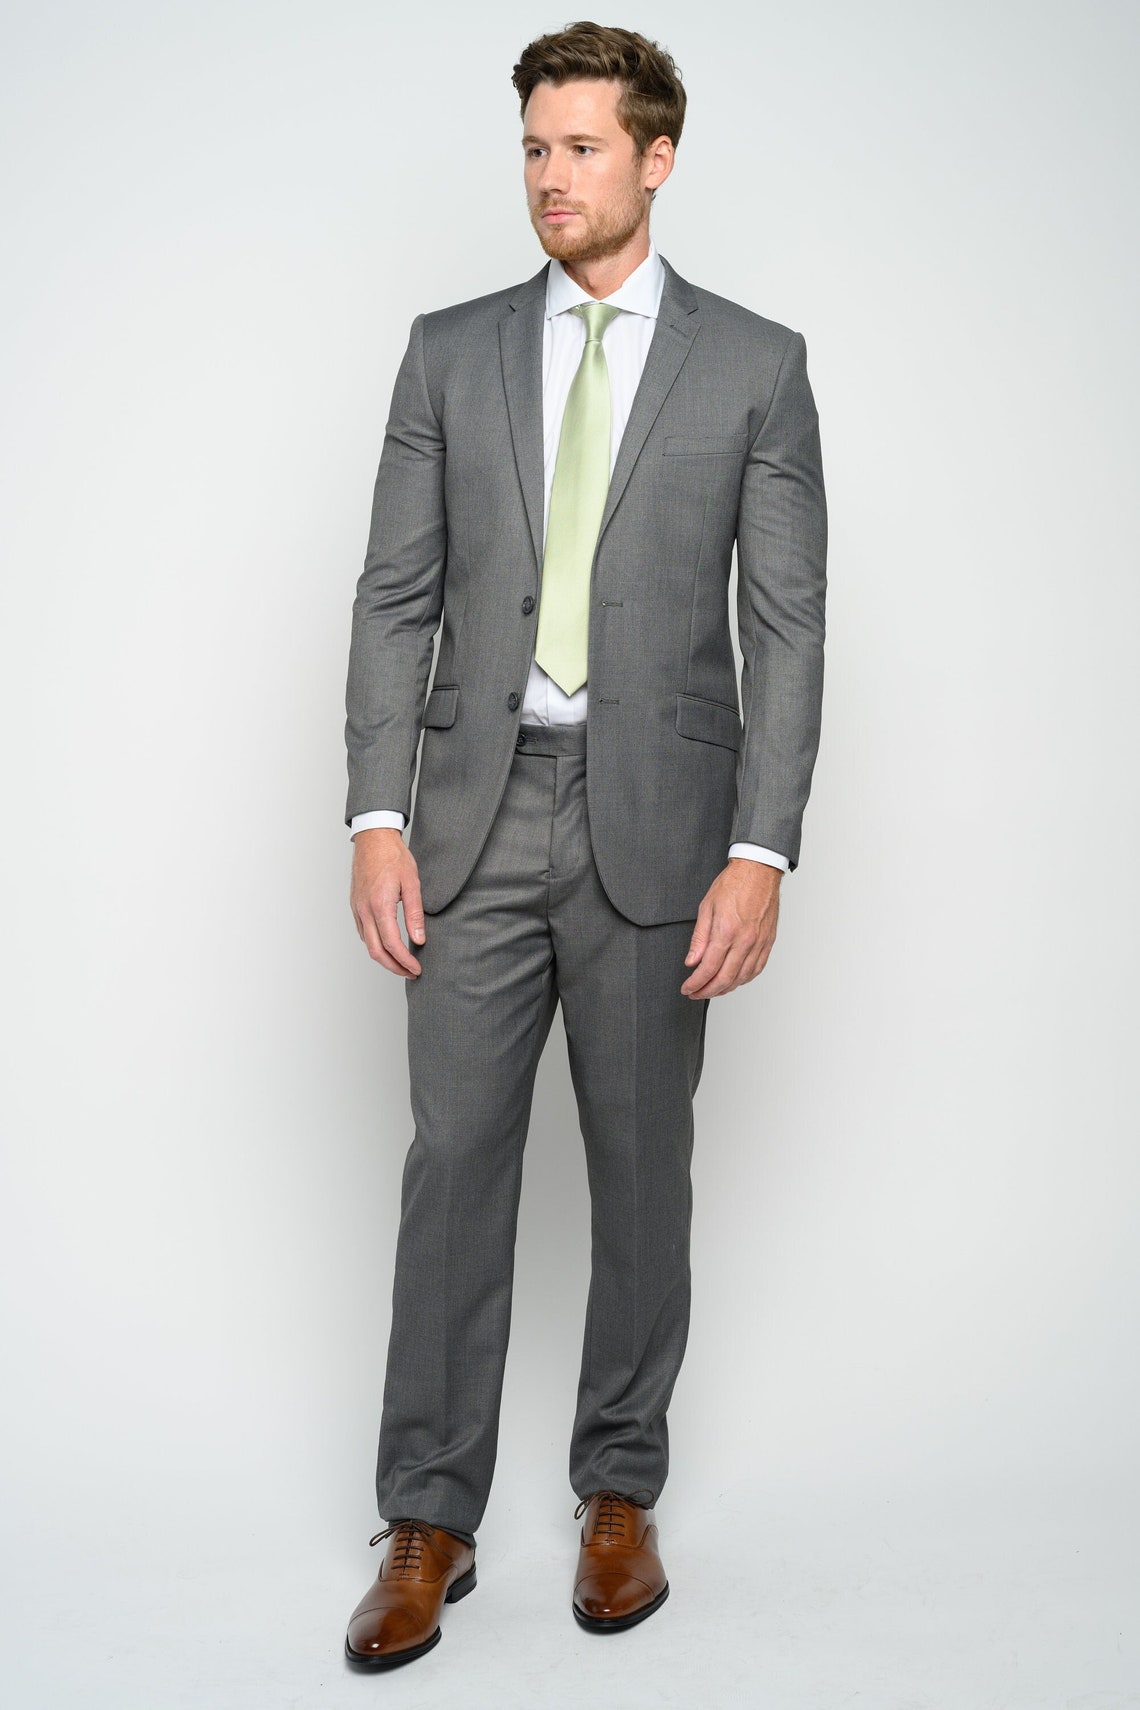 Men's Gray 2-pieces Slim Fit Suit Perfect for Weddings - Etsy